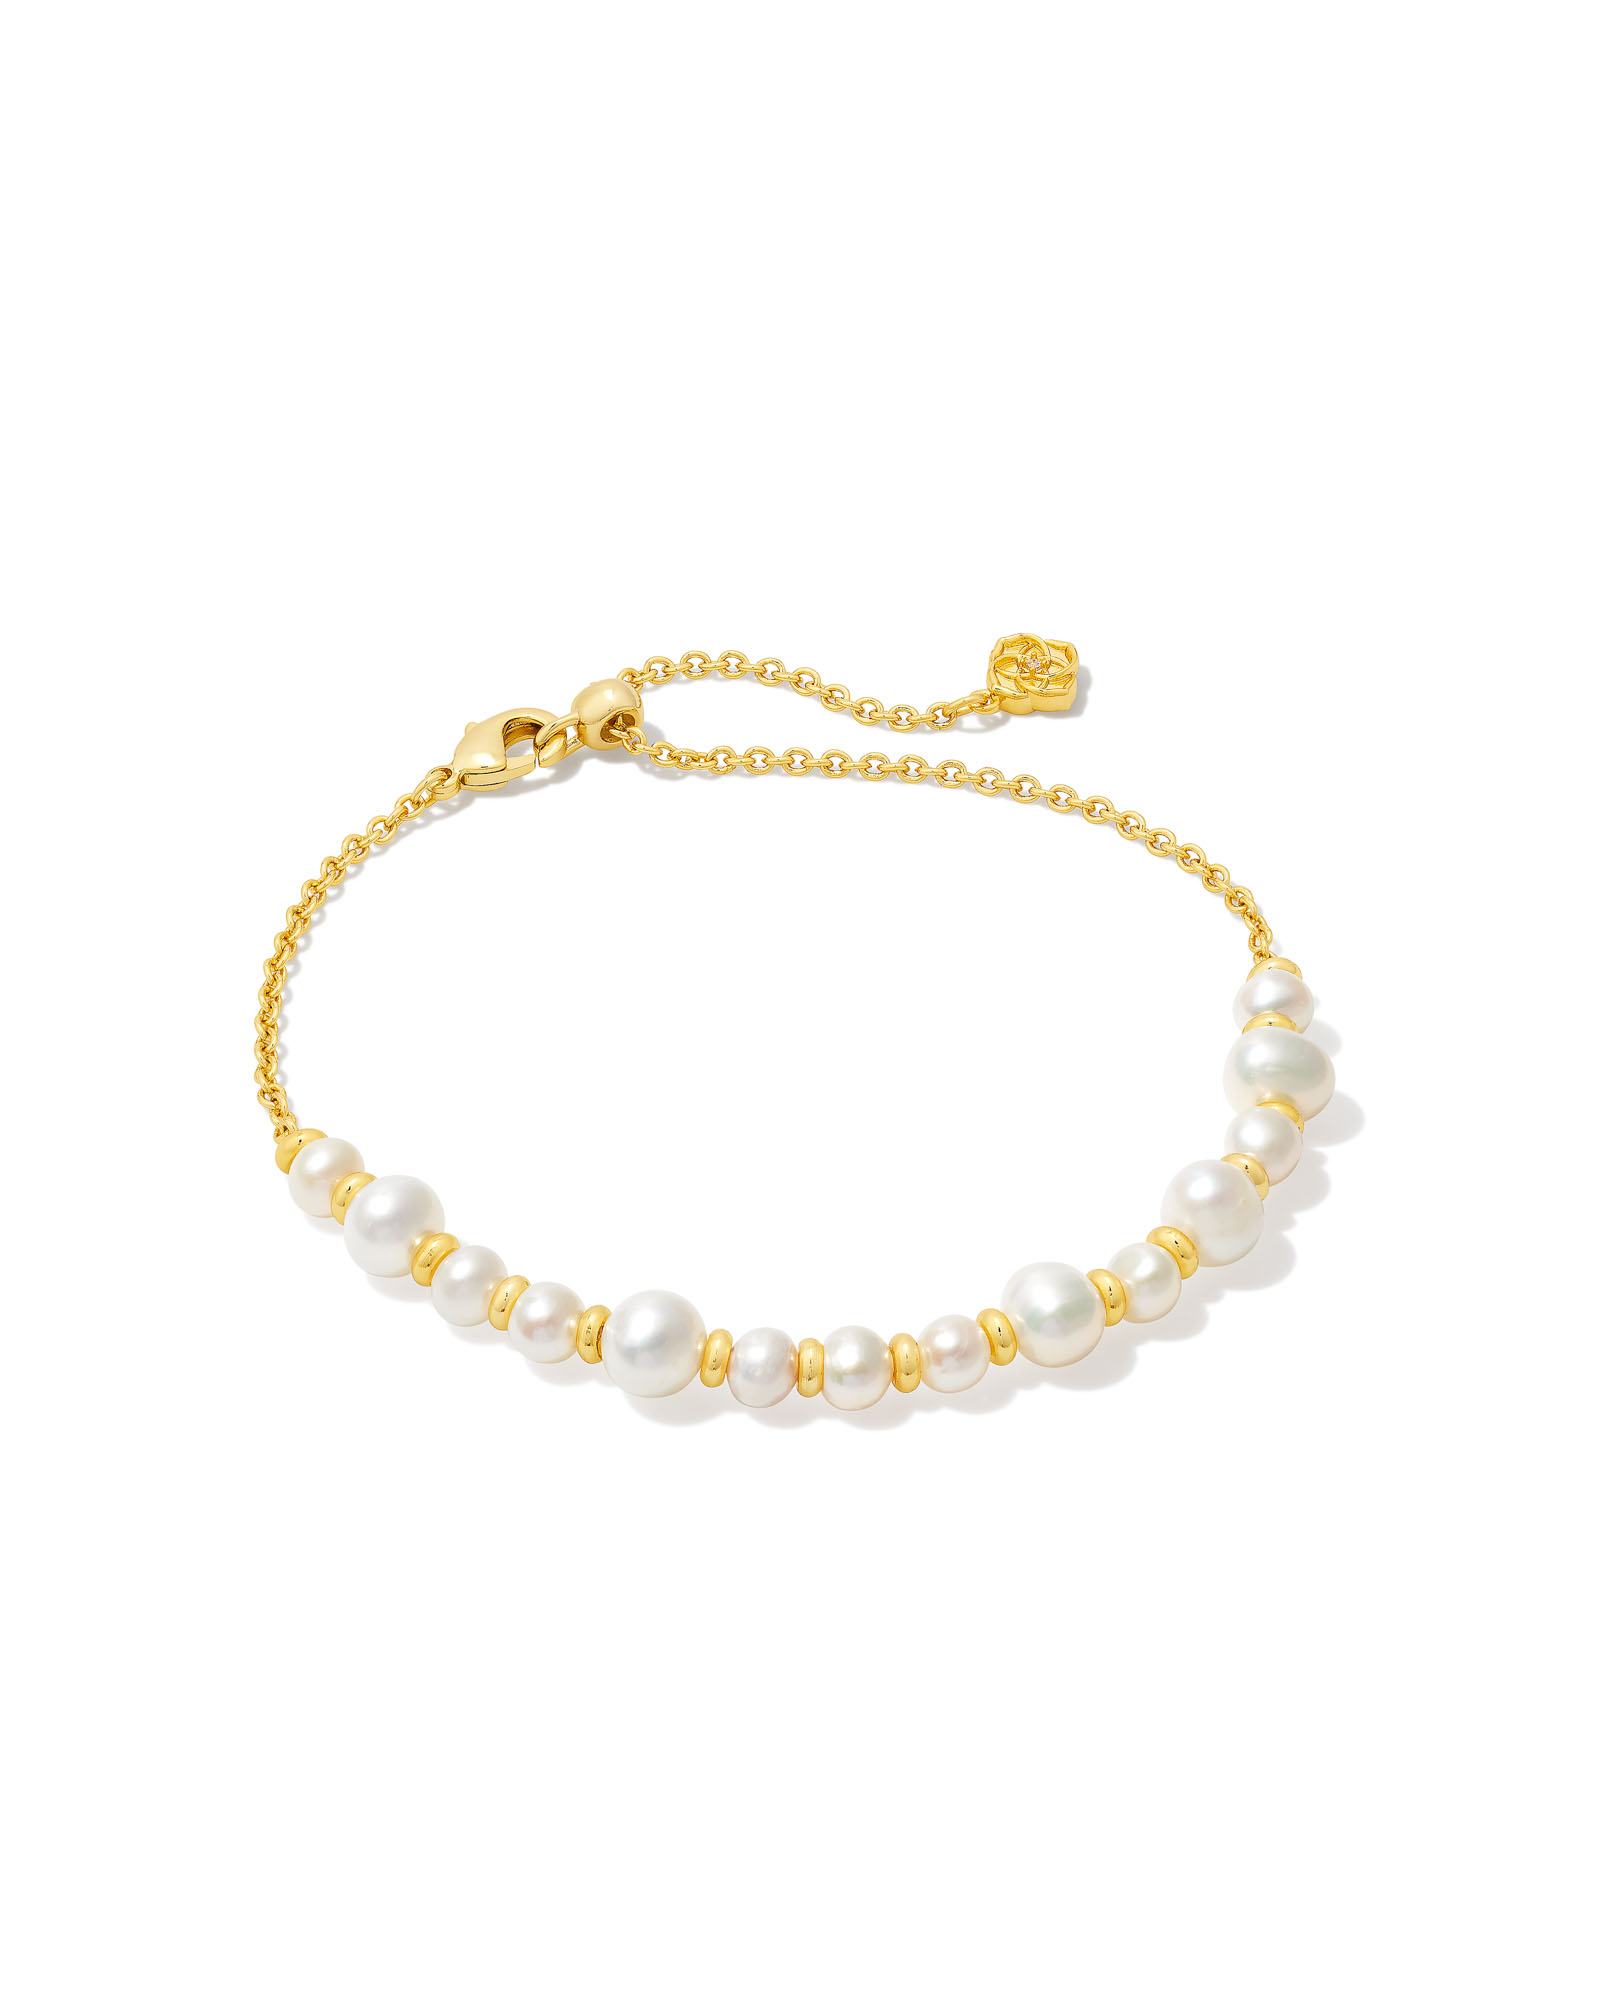 Pearl Bracelet With Jade Charm  Gold  Beaded jewelry Beaded bracelets  Crystal bracelets